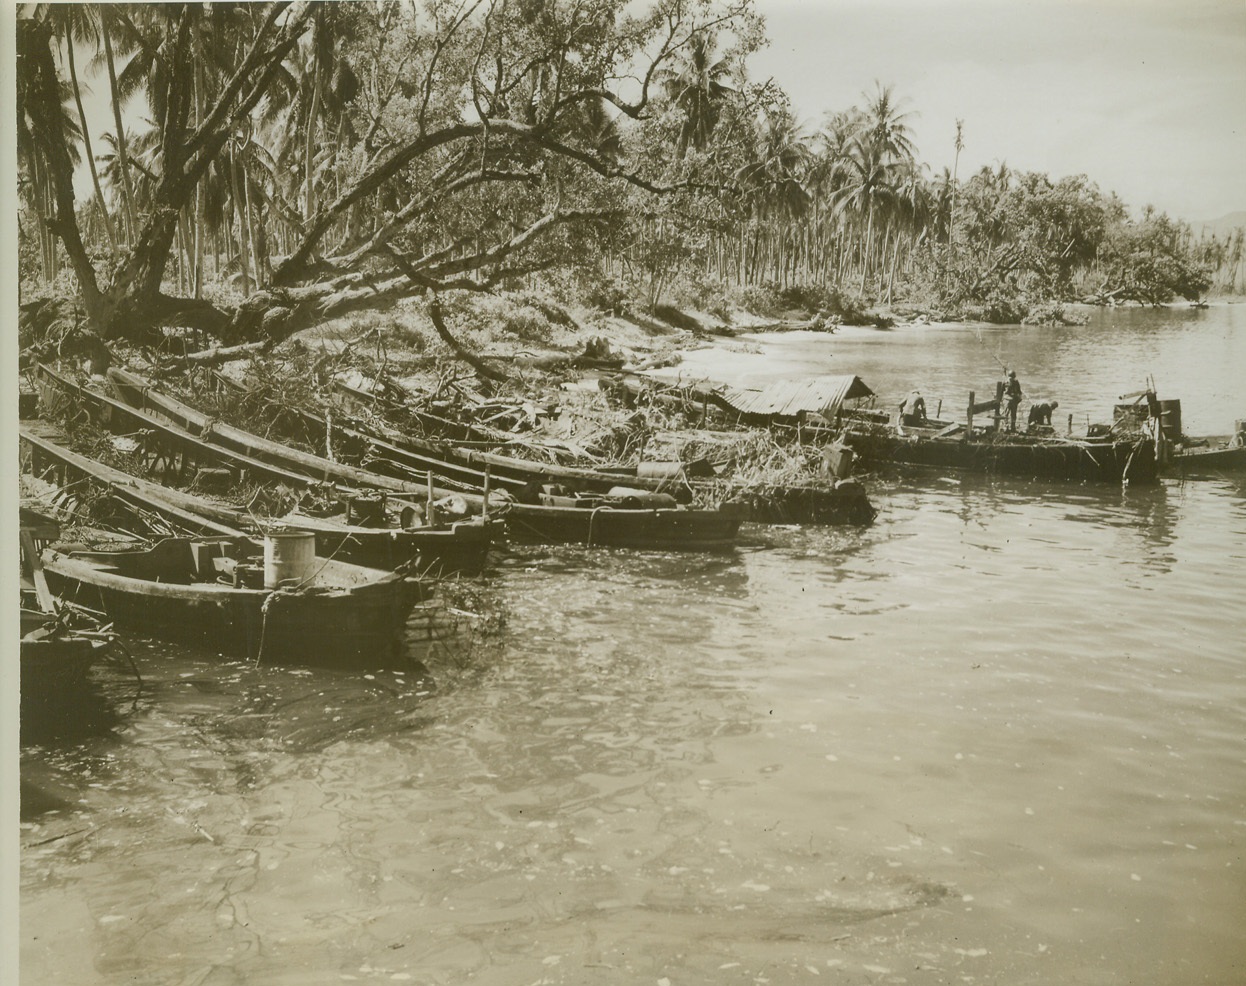 JAP BARGES BURNED OUT BY BOMBARDMENT, 5/3/1944. DUTCH NEW GUINEA – U.S. troops (right) look over Jap barges on Selso Island, burned out under shelling by Allied warships. The island is one of three in Aitape Harbor attacked during the invasions of Dutch New Guinea. (Passed by censors.) Credit: ACME photo by Thomas L. Shafer for the War Picture Pool;